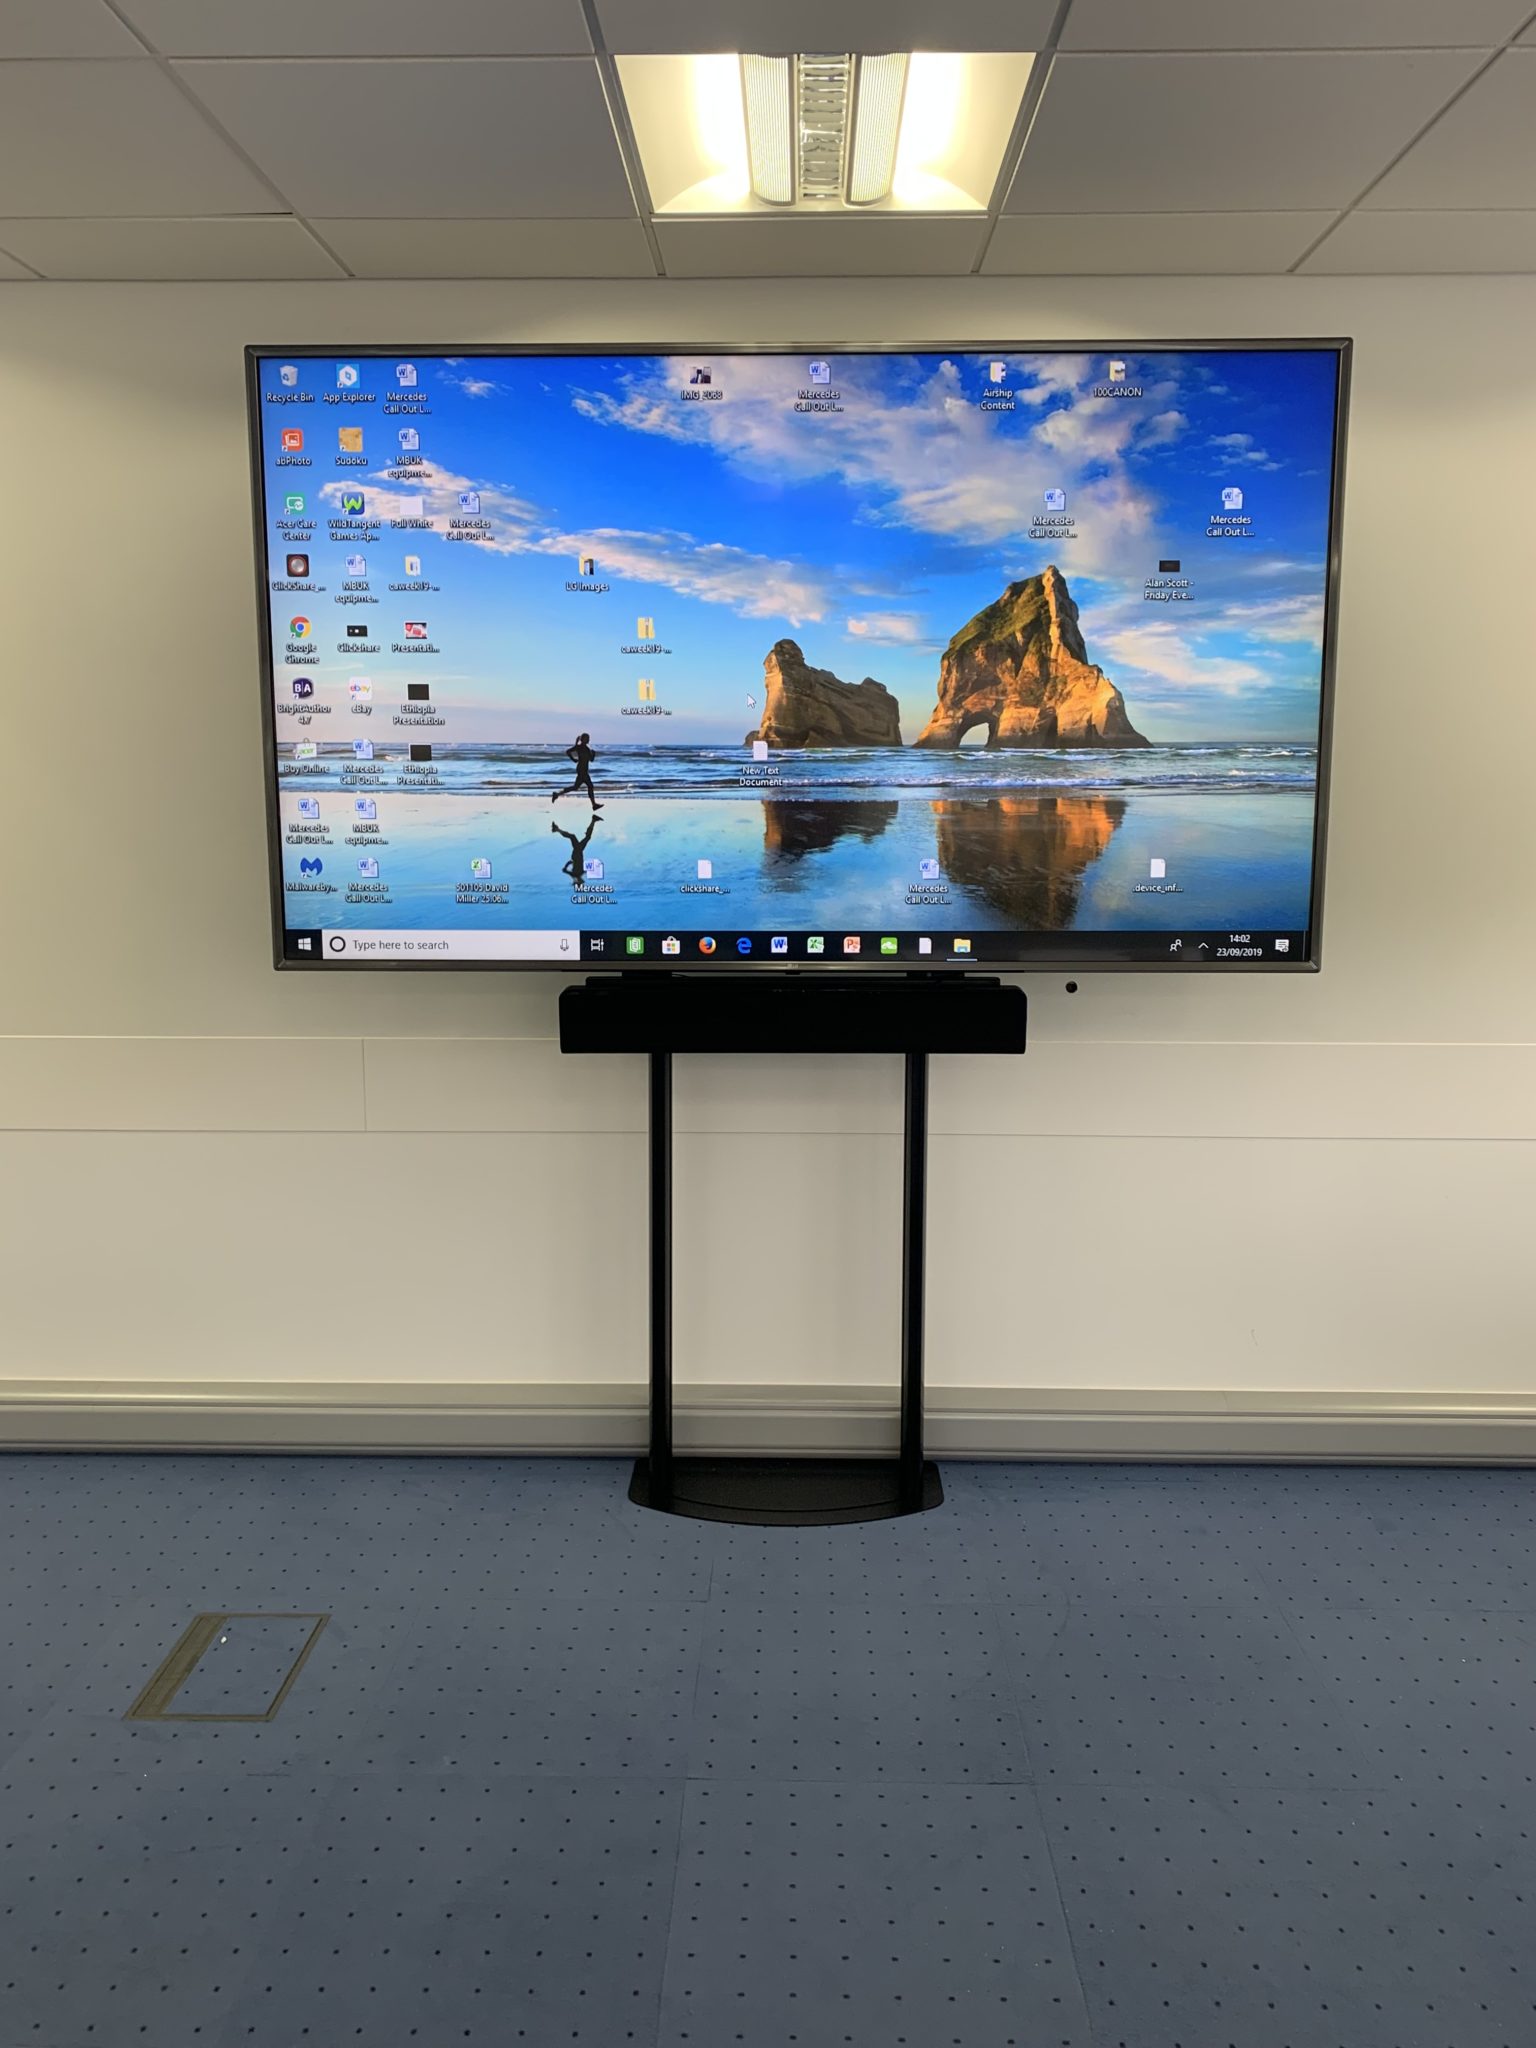 75" display on a floor/wall support